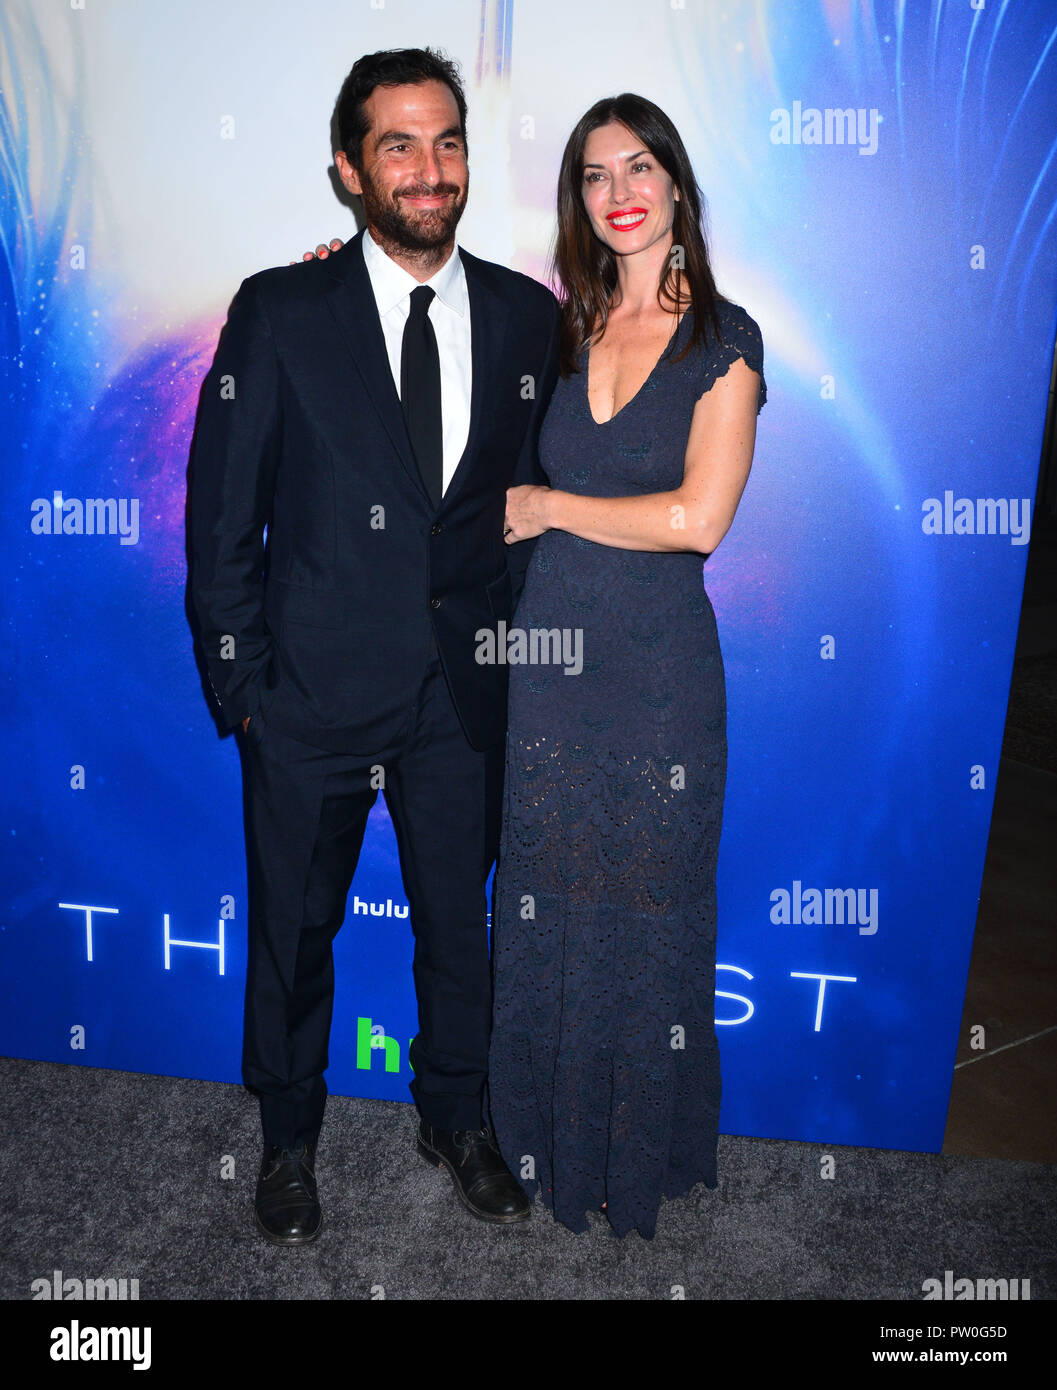 Jordan Tappis - Executive Producer - and Heidi Tappis attends the premiere  of Hulu's 'The First' on September 12, 2018 in Los Angeles, California  Stock Photo - Alamy